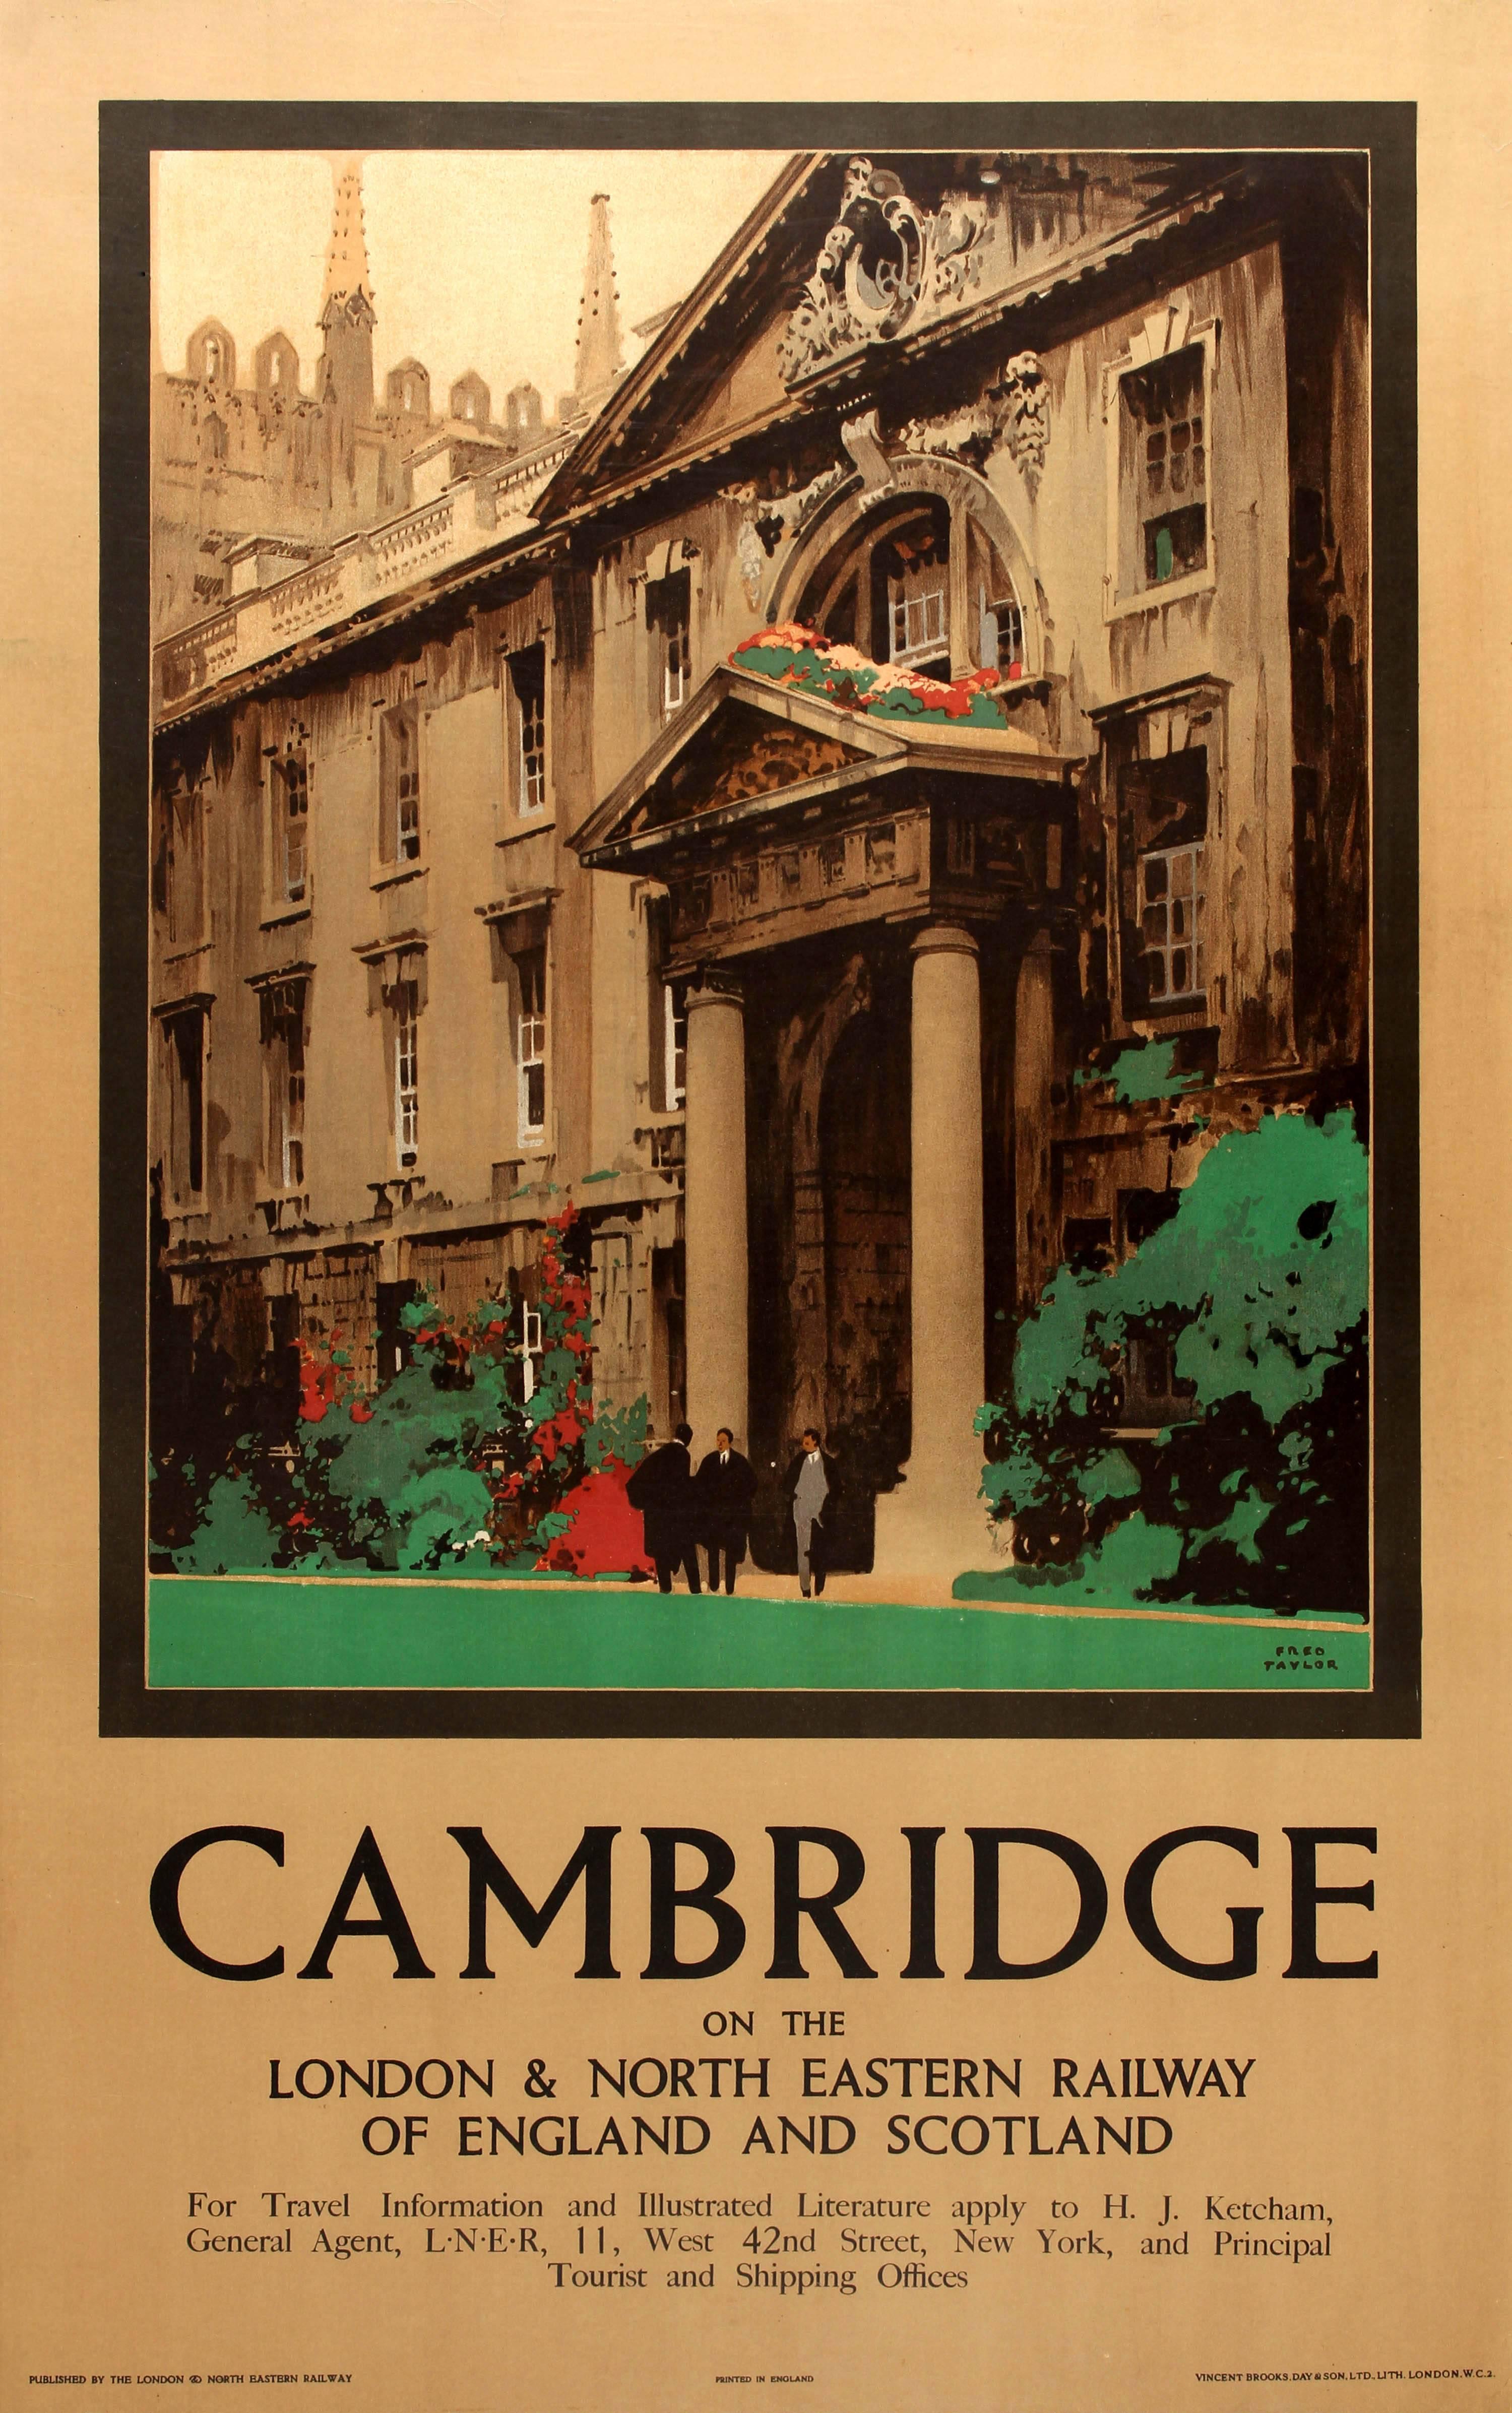 Fred Taylor Print - Original Vintage LNER Railway Travel Poster Featuring King's College Cambridge